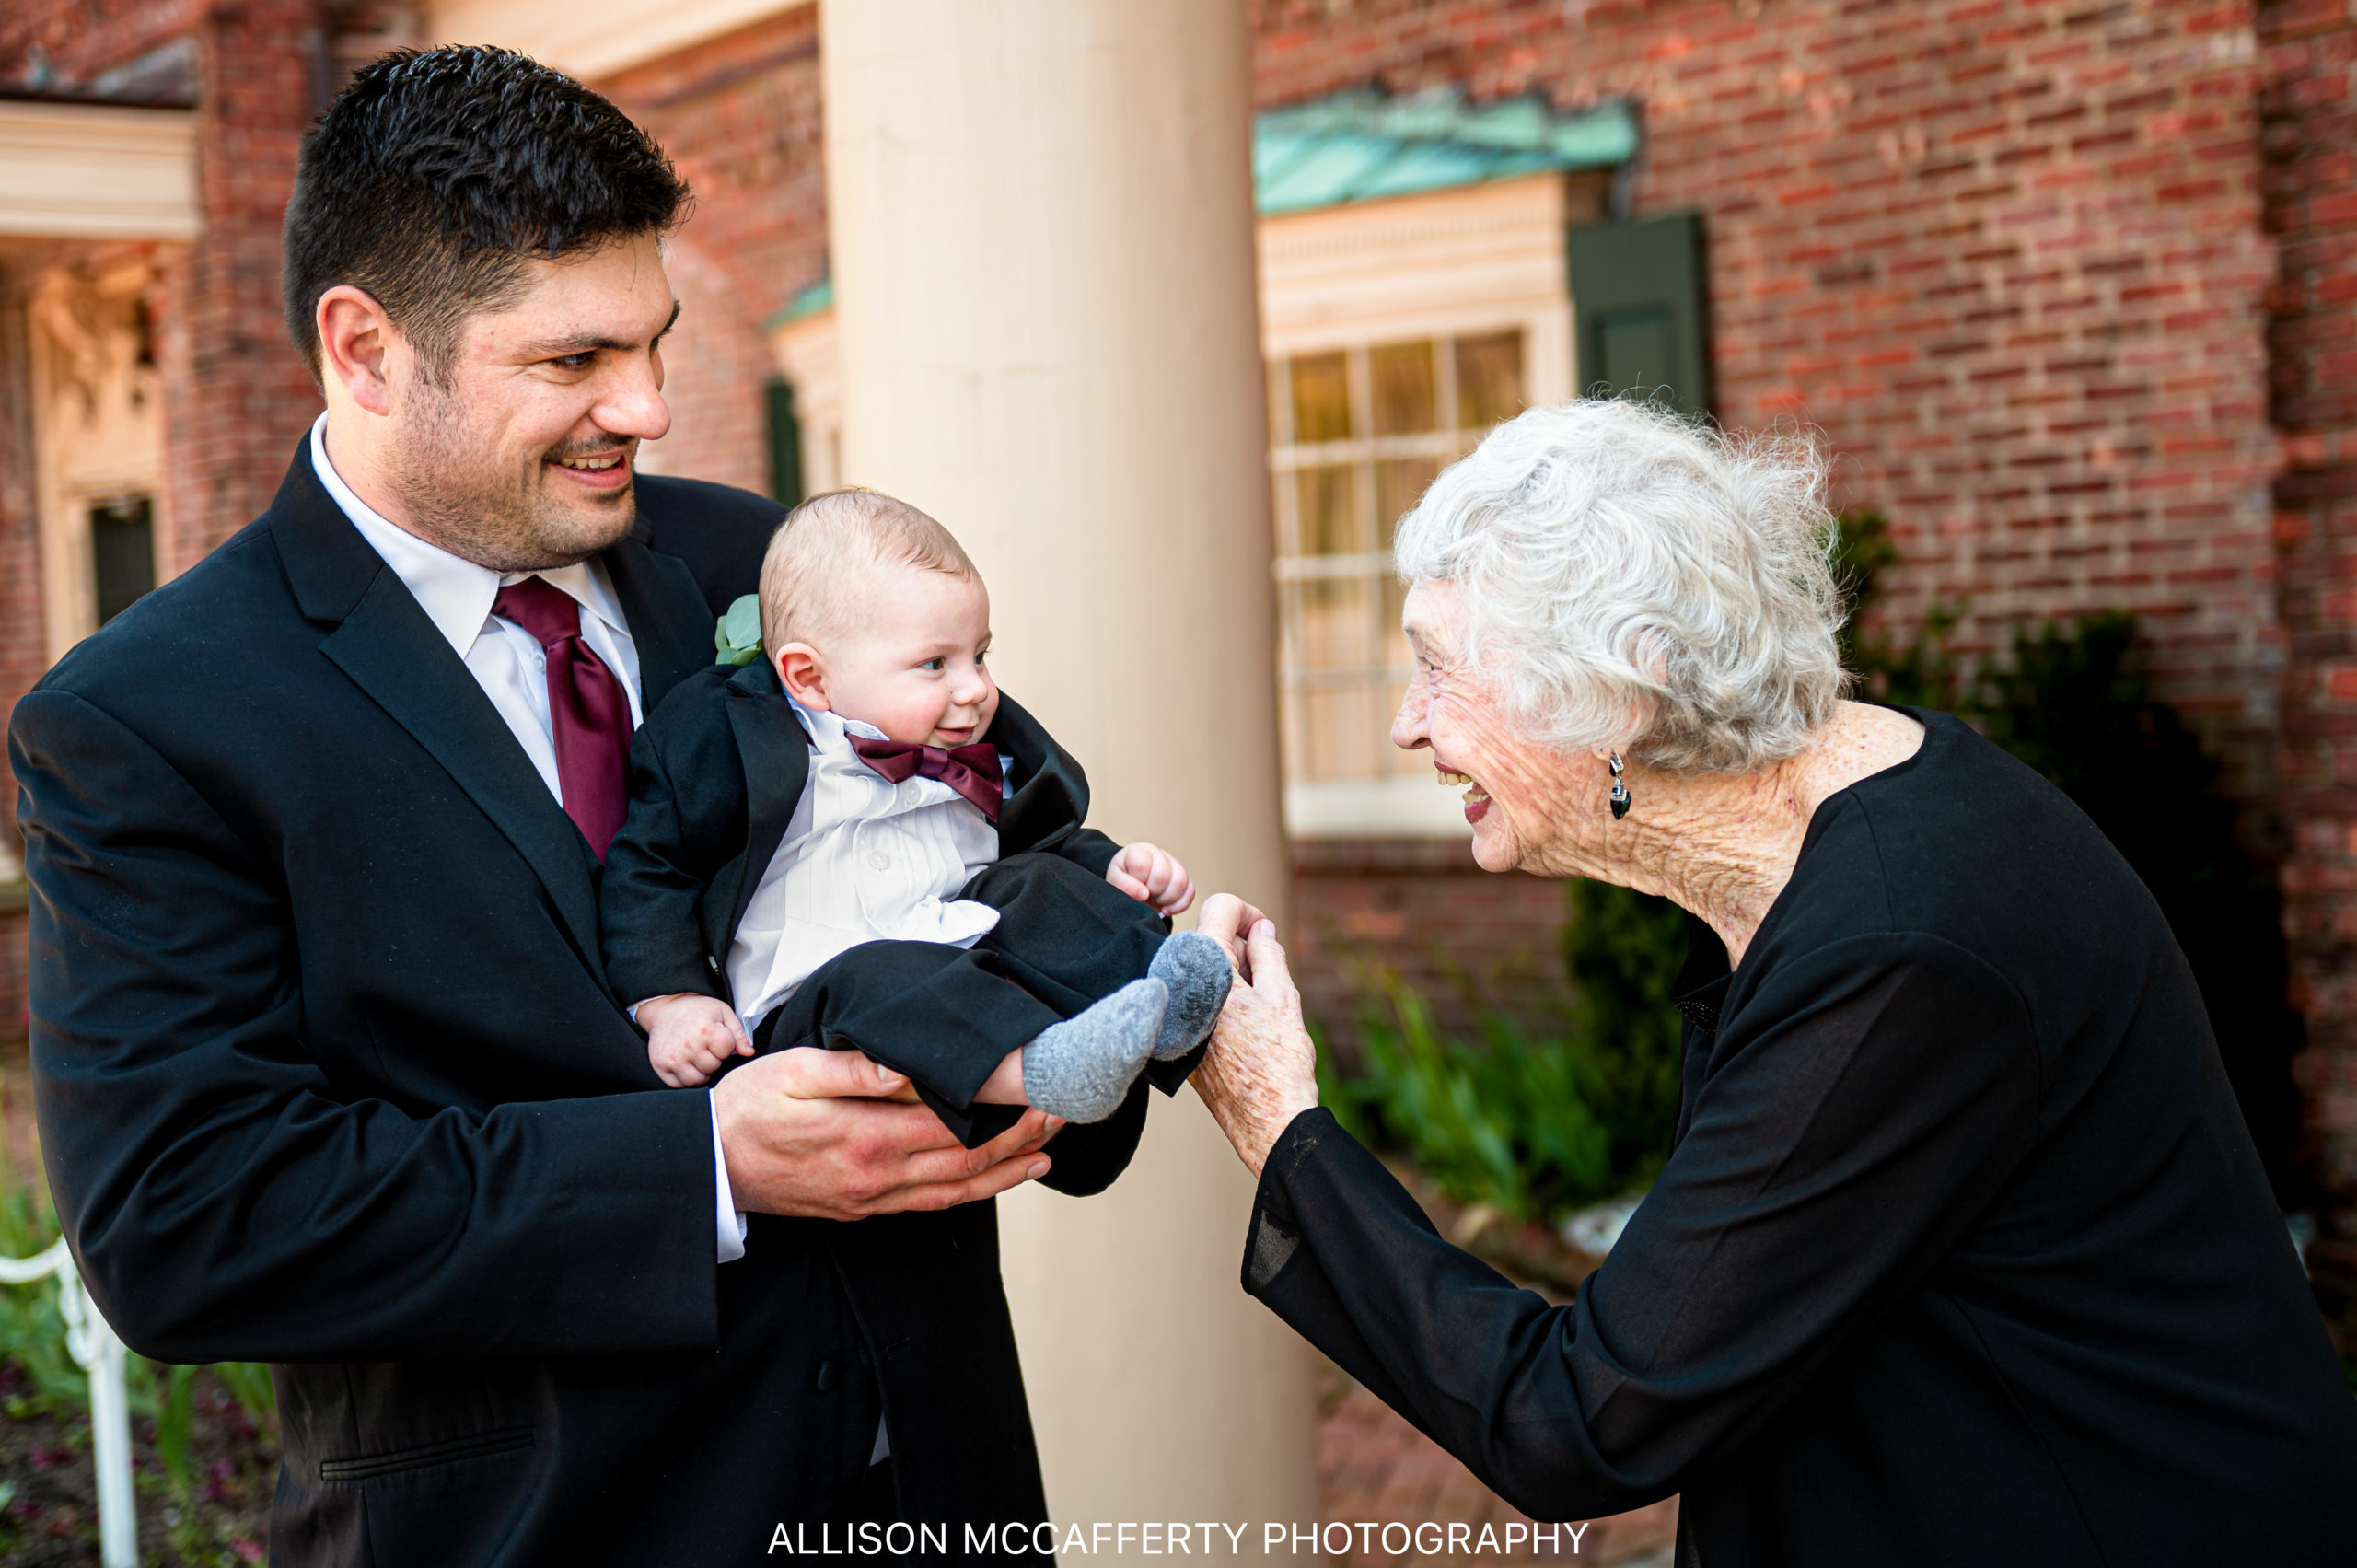 Wedding photo of a man holding his baby son wearing a suit and his grandmother is smiling at him in front of The Manor in West Orange NJ